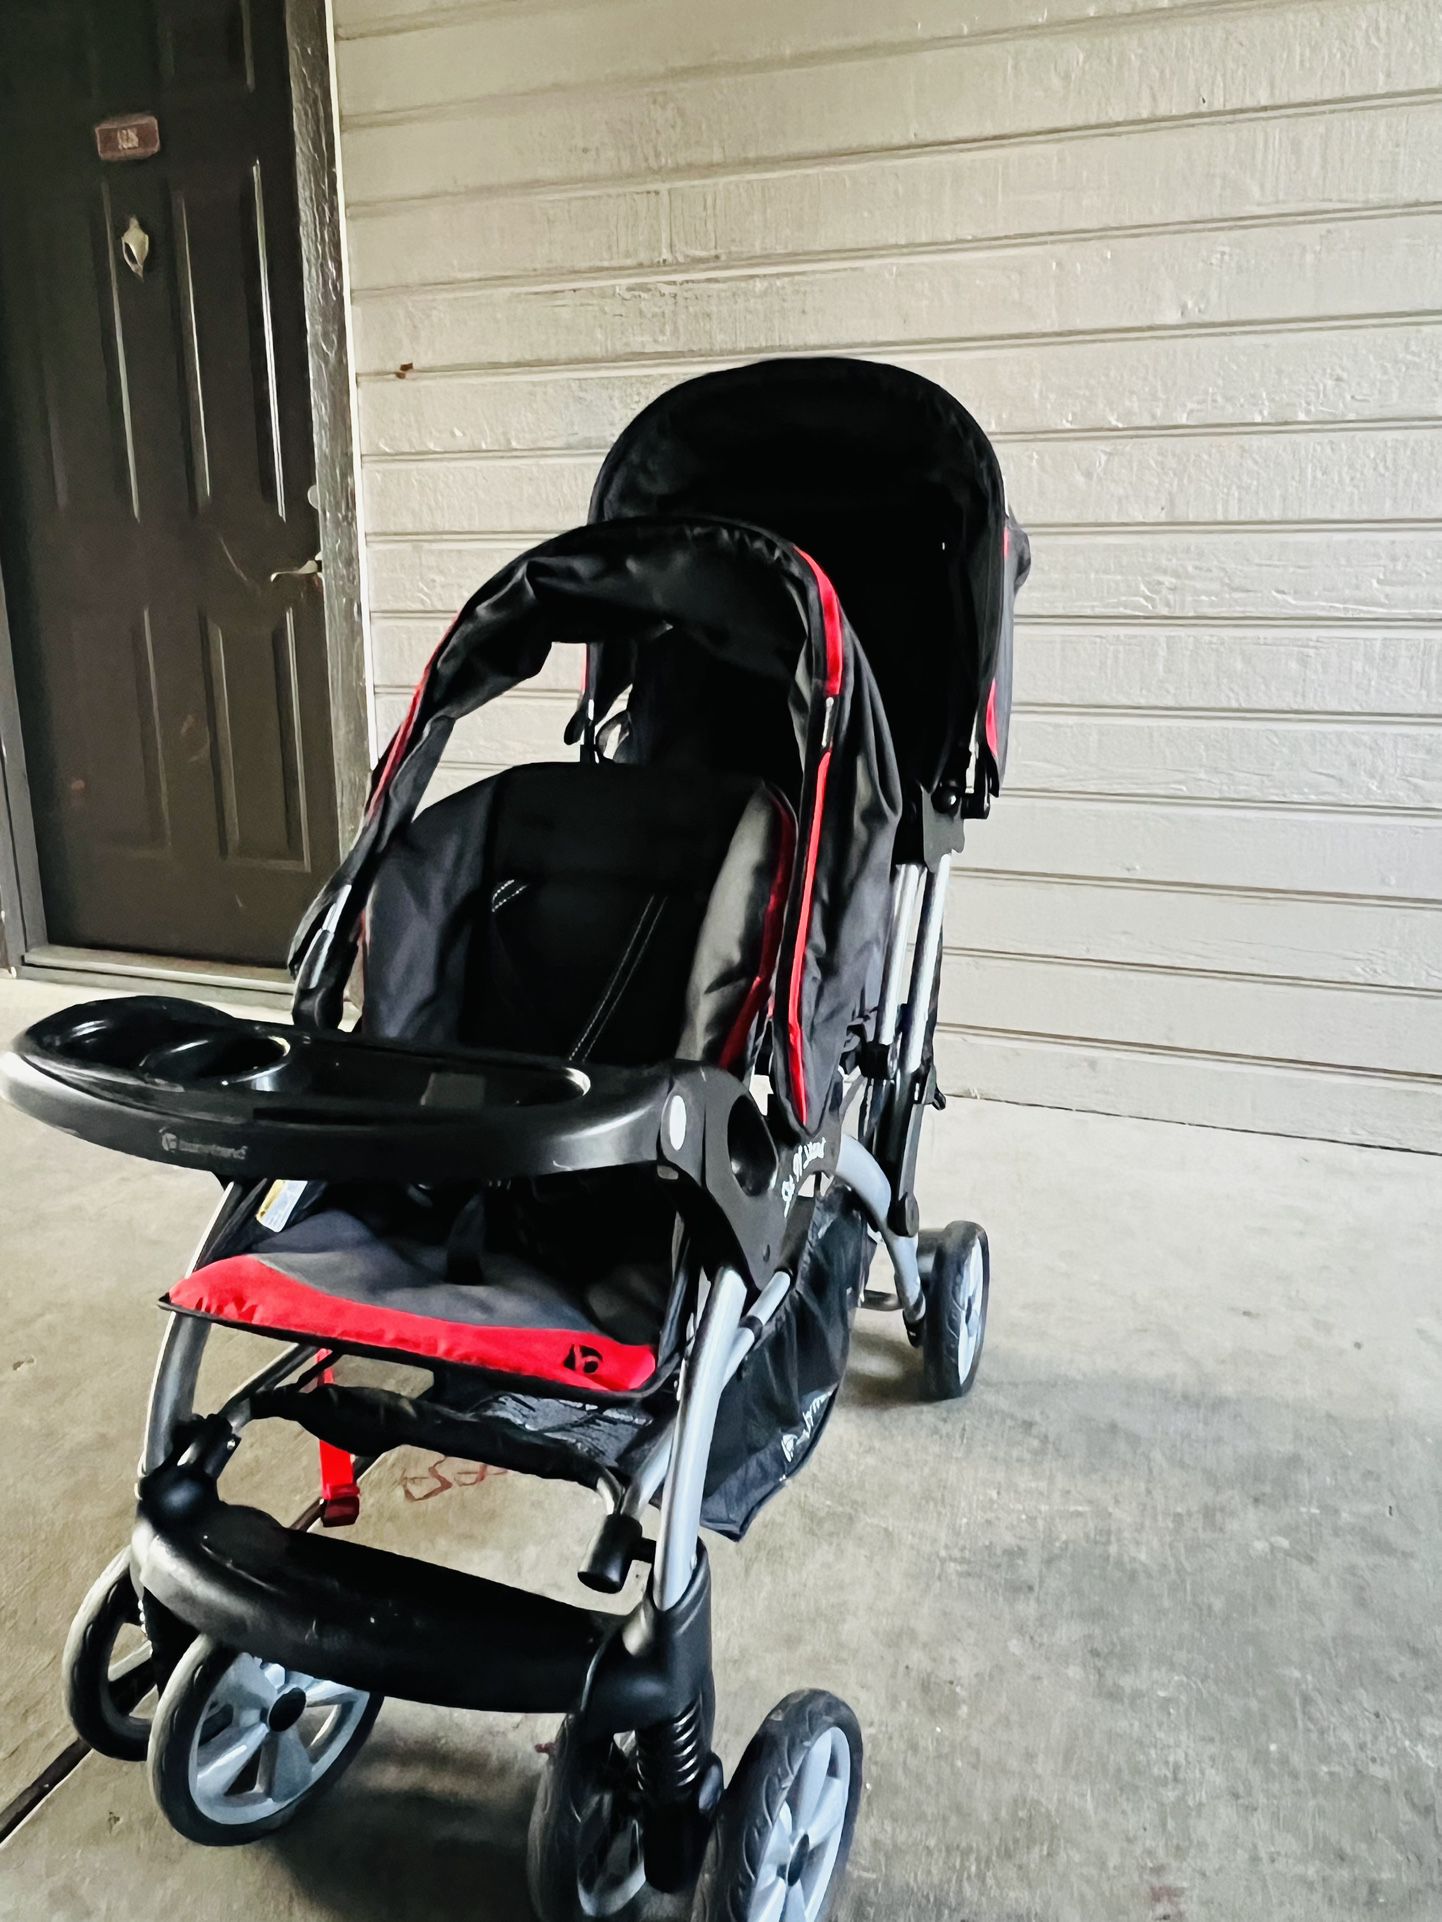 2 Baby Stroller With a Baby Car Set